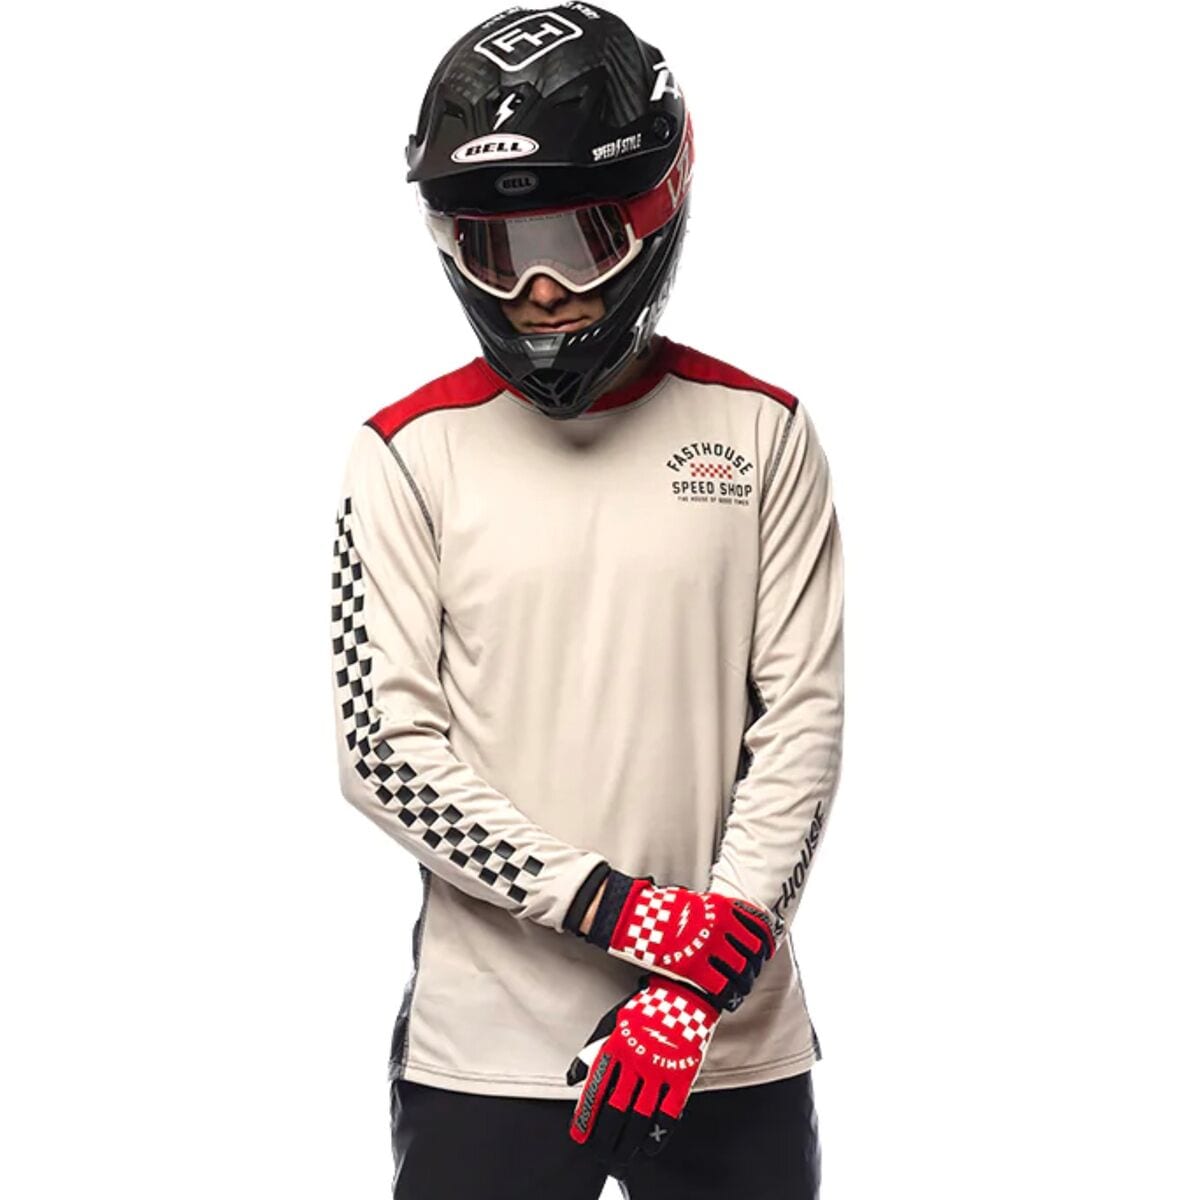 Fasthouse Classic Outland Long-Sleeve Jersey - Men's